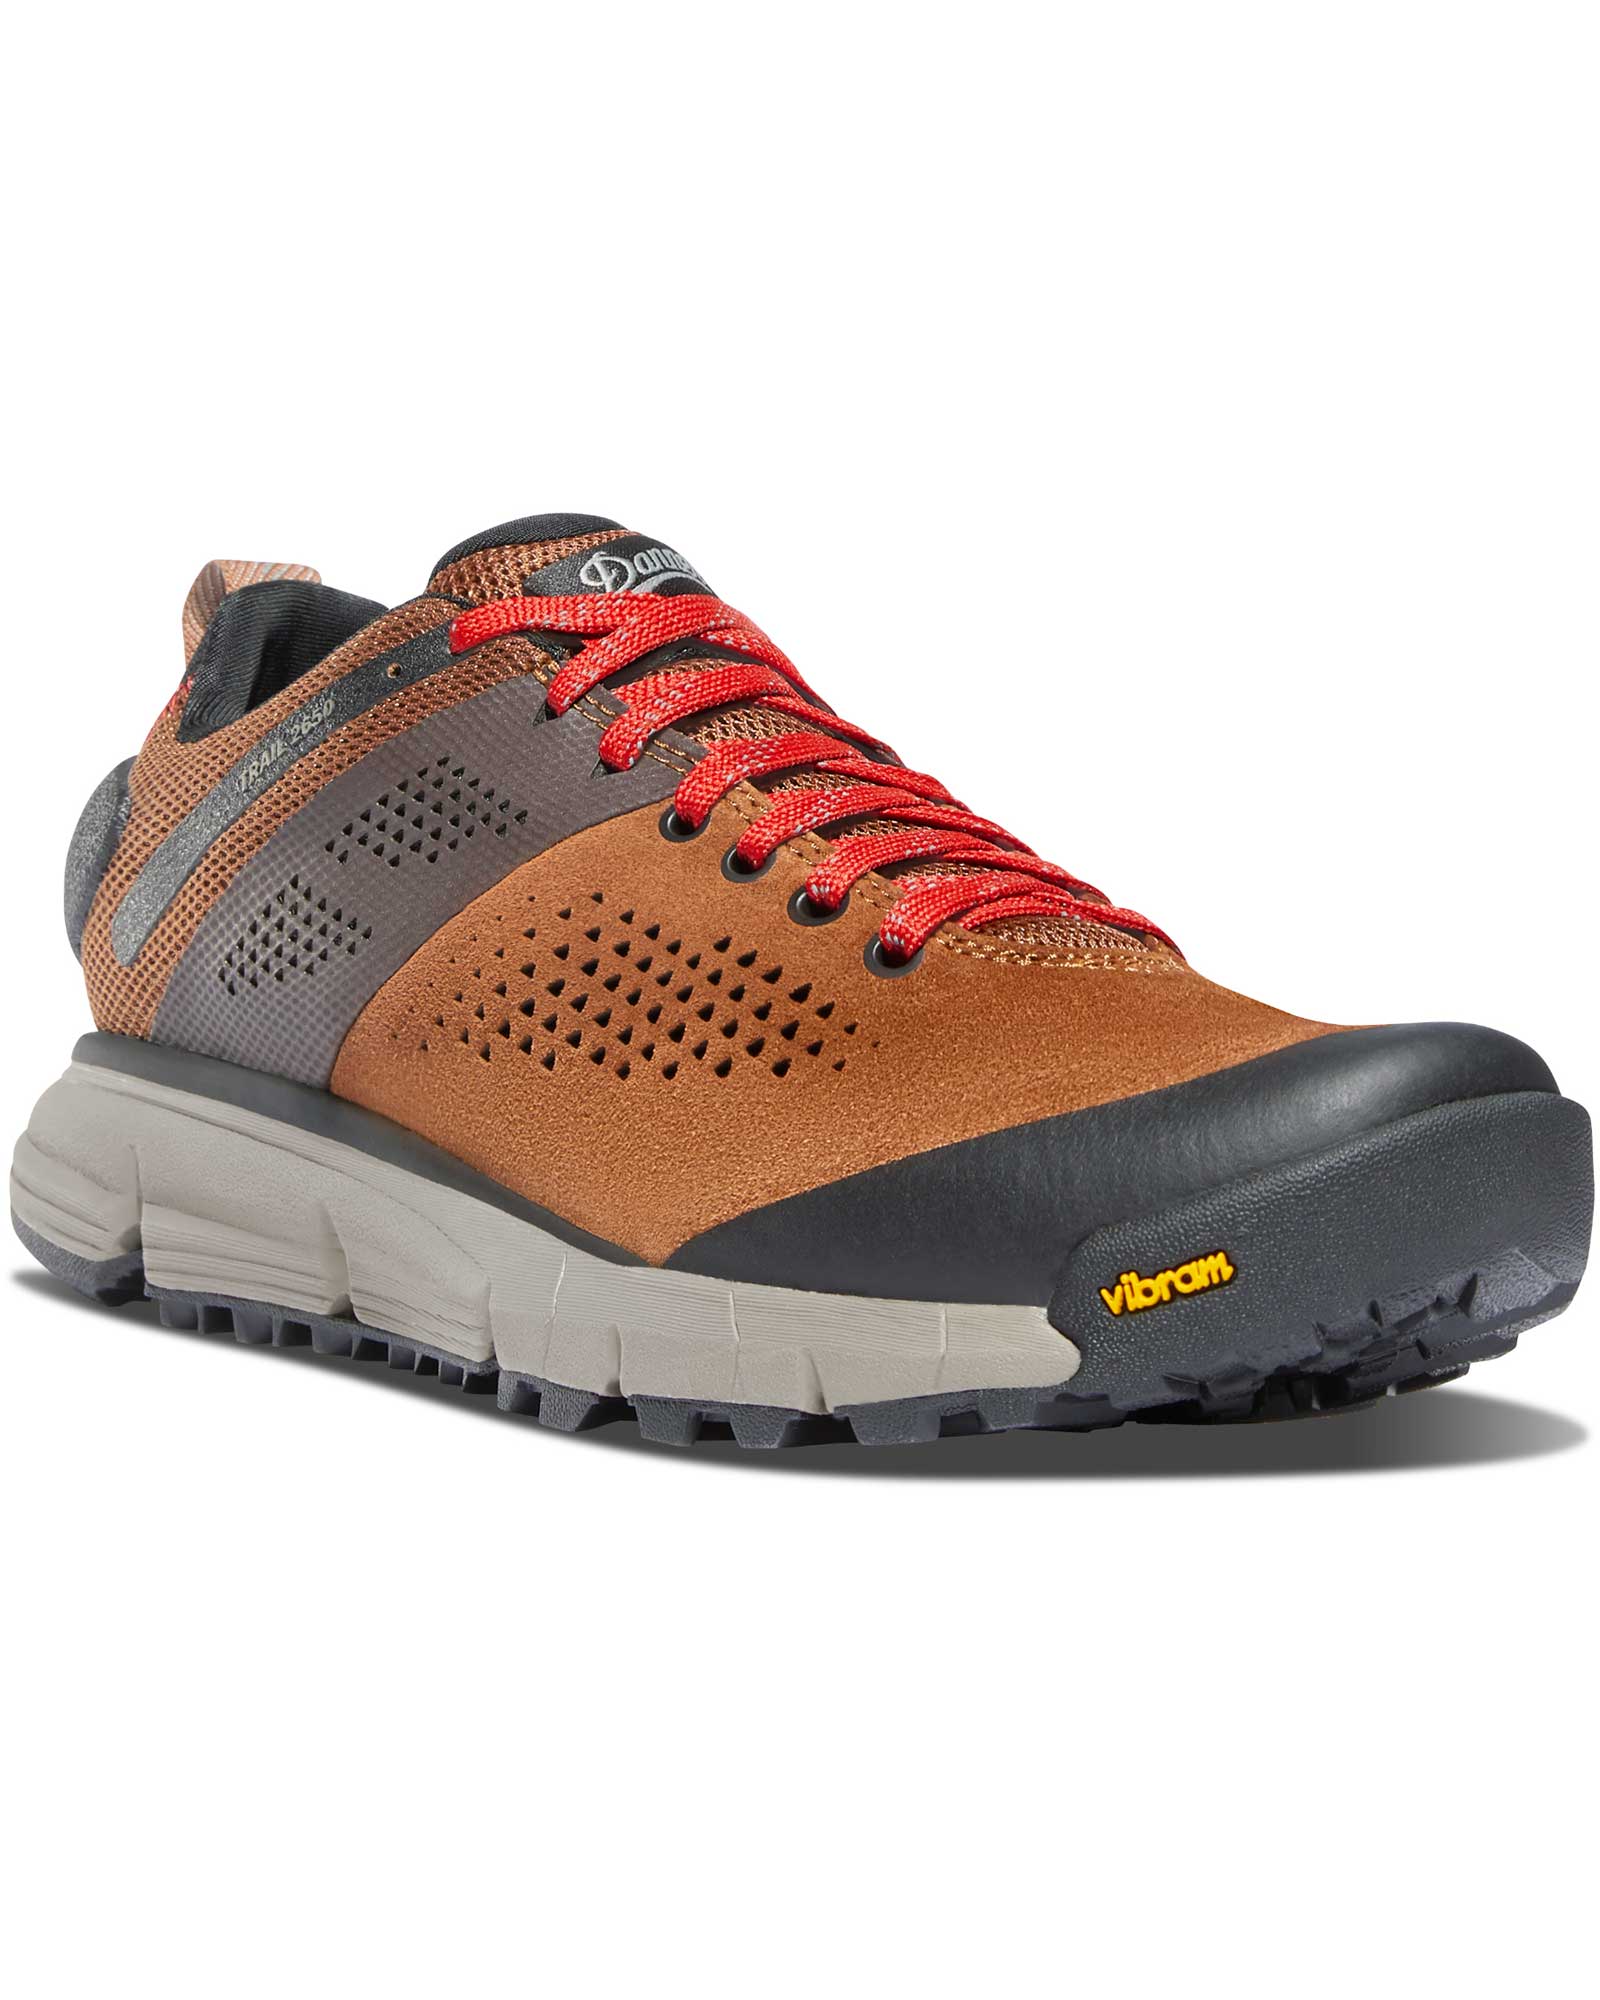 Danner Women’s Trail 2650 Trainers - Brown/Red UK 6